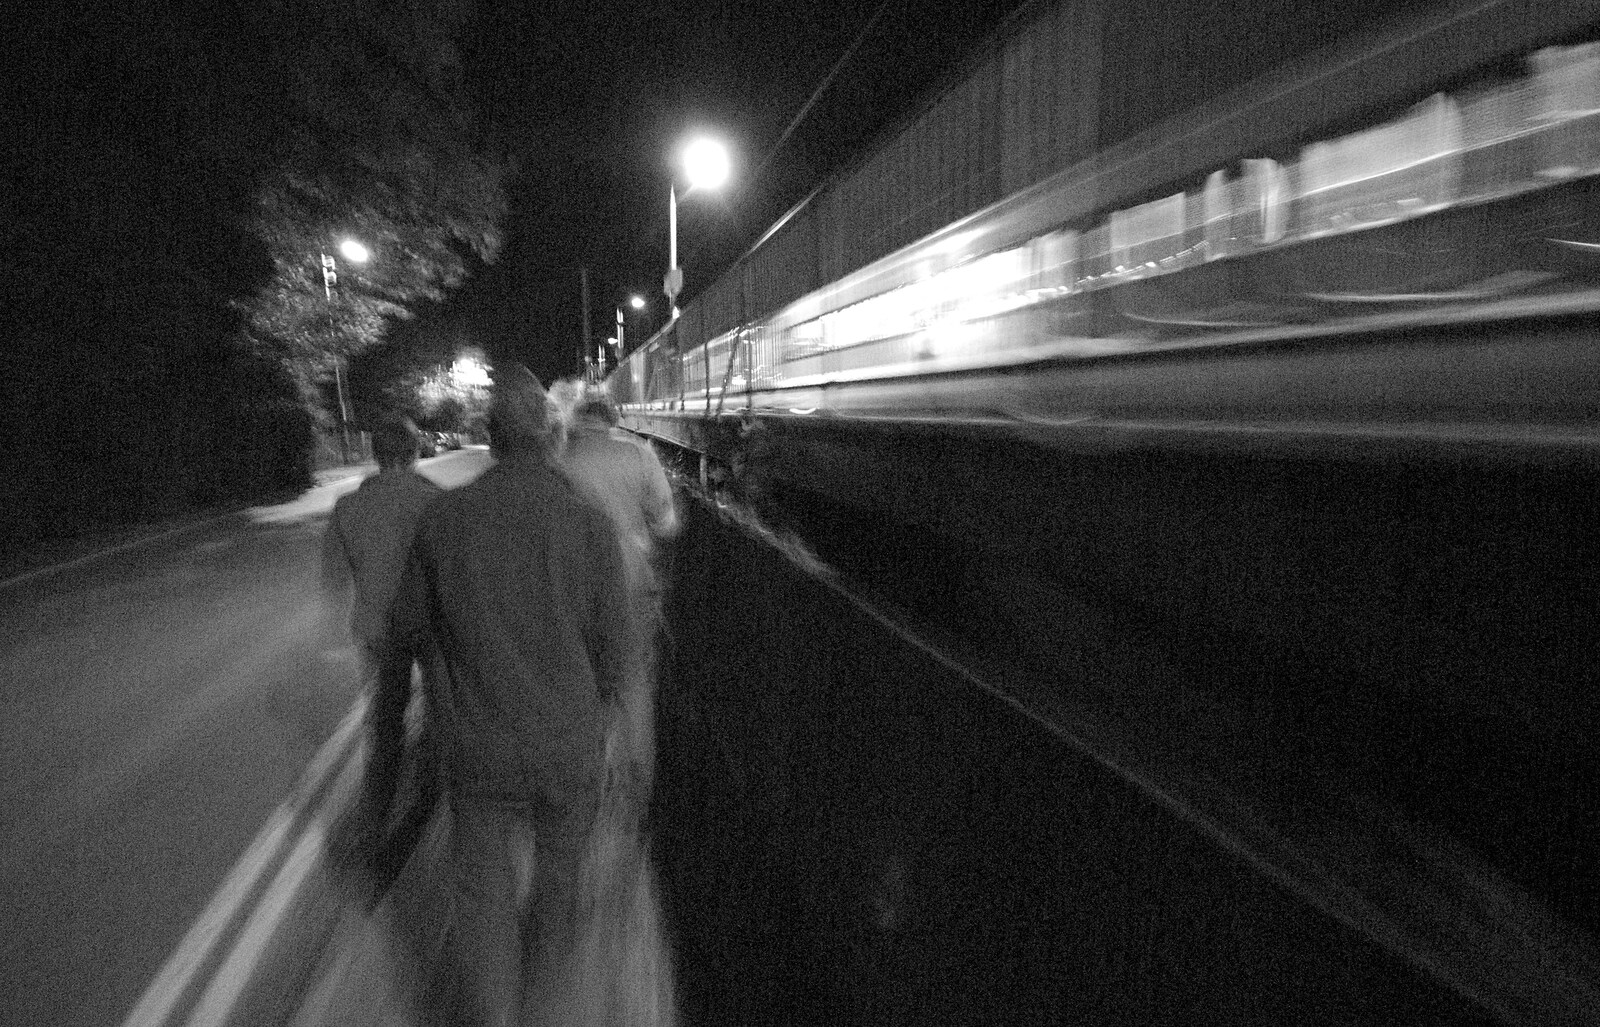 The trains pulls out on its way to London from The Norwich Beer Festival, St. Andrew's Hall, Norwich, Norfolk - 27th October 2010